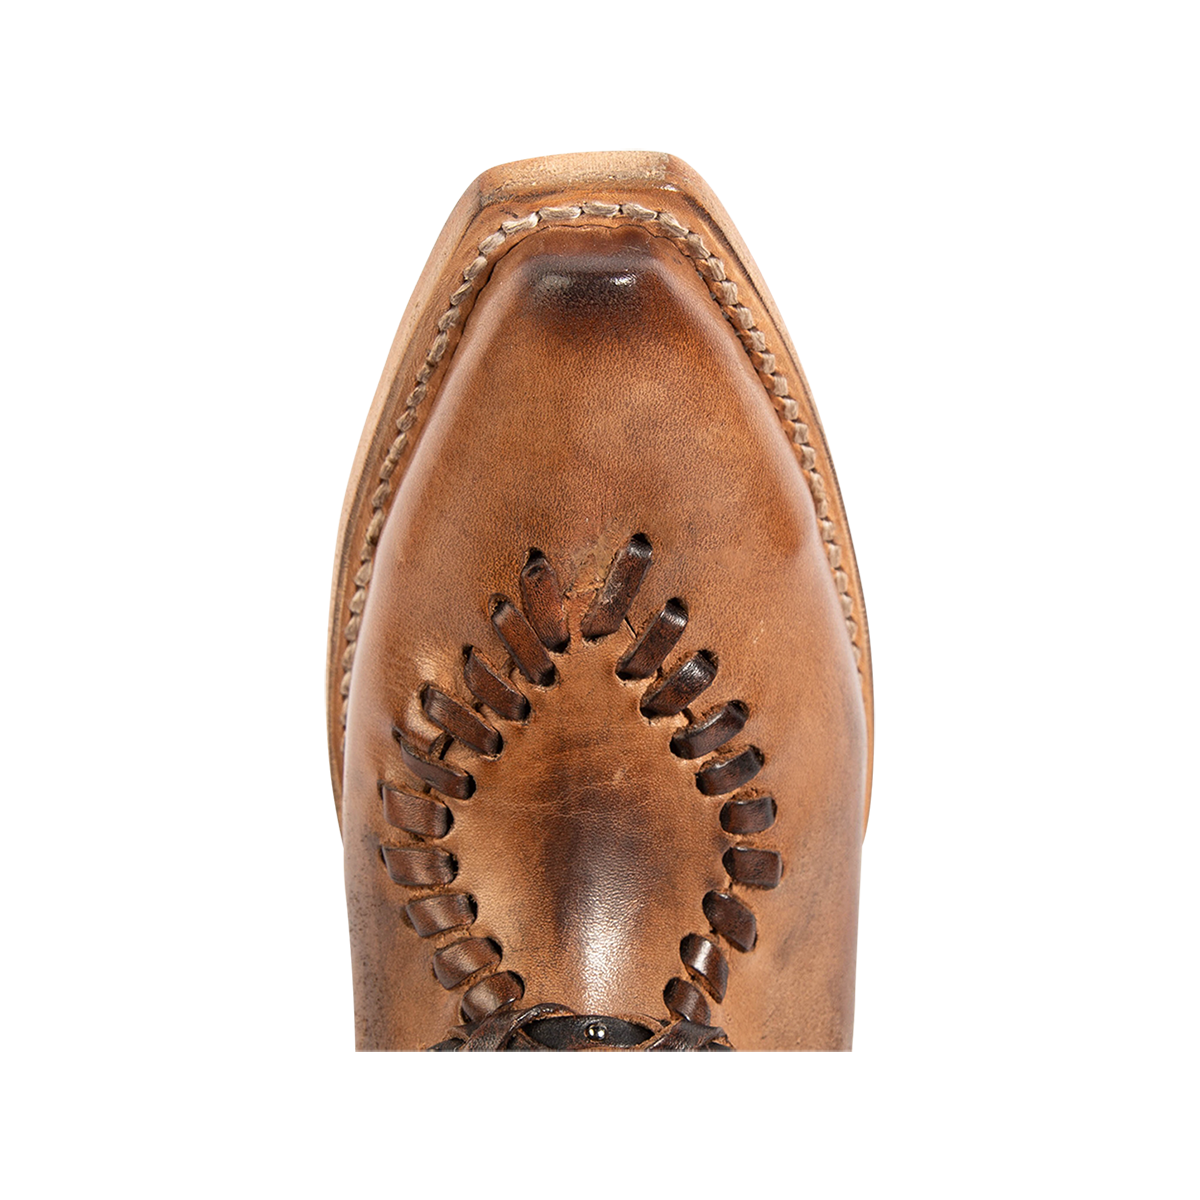 Top view showing whip stitch detailing and snip toe construction on FREEBIRD women's Whimsical tan leather bootie